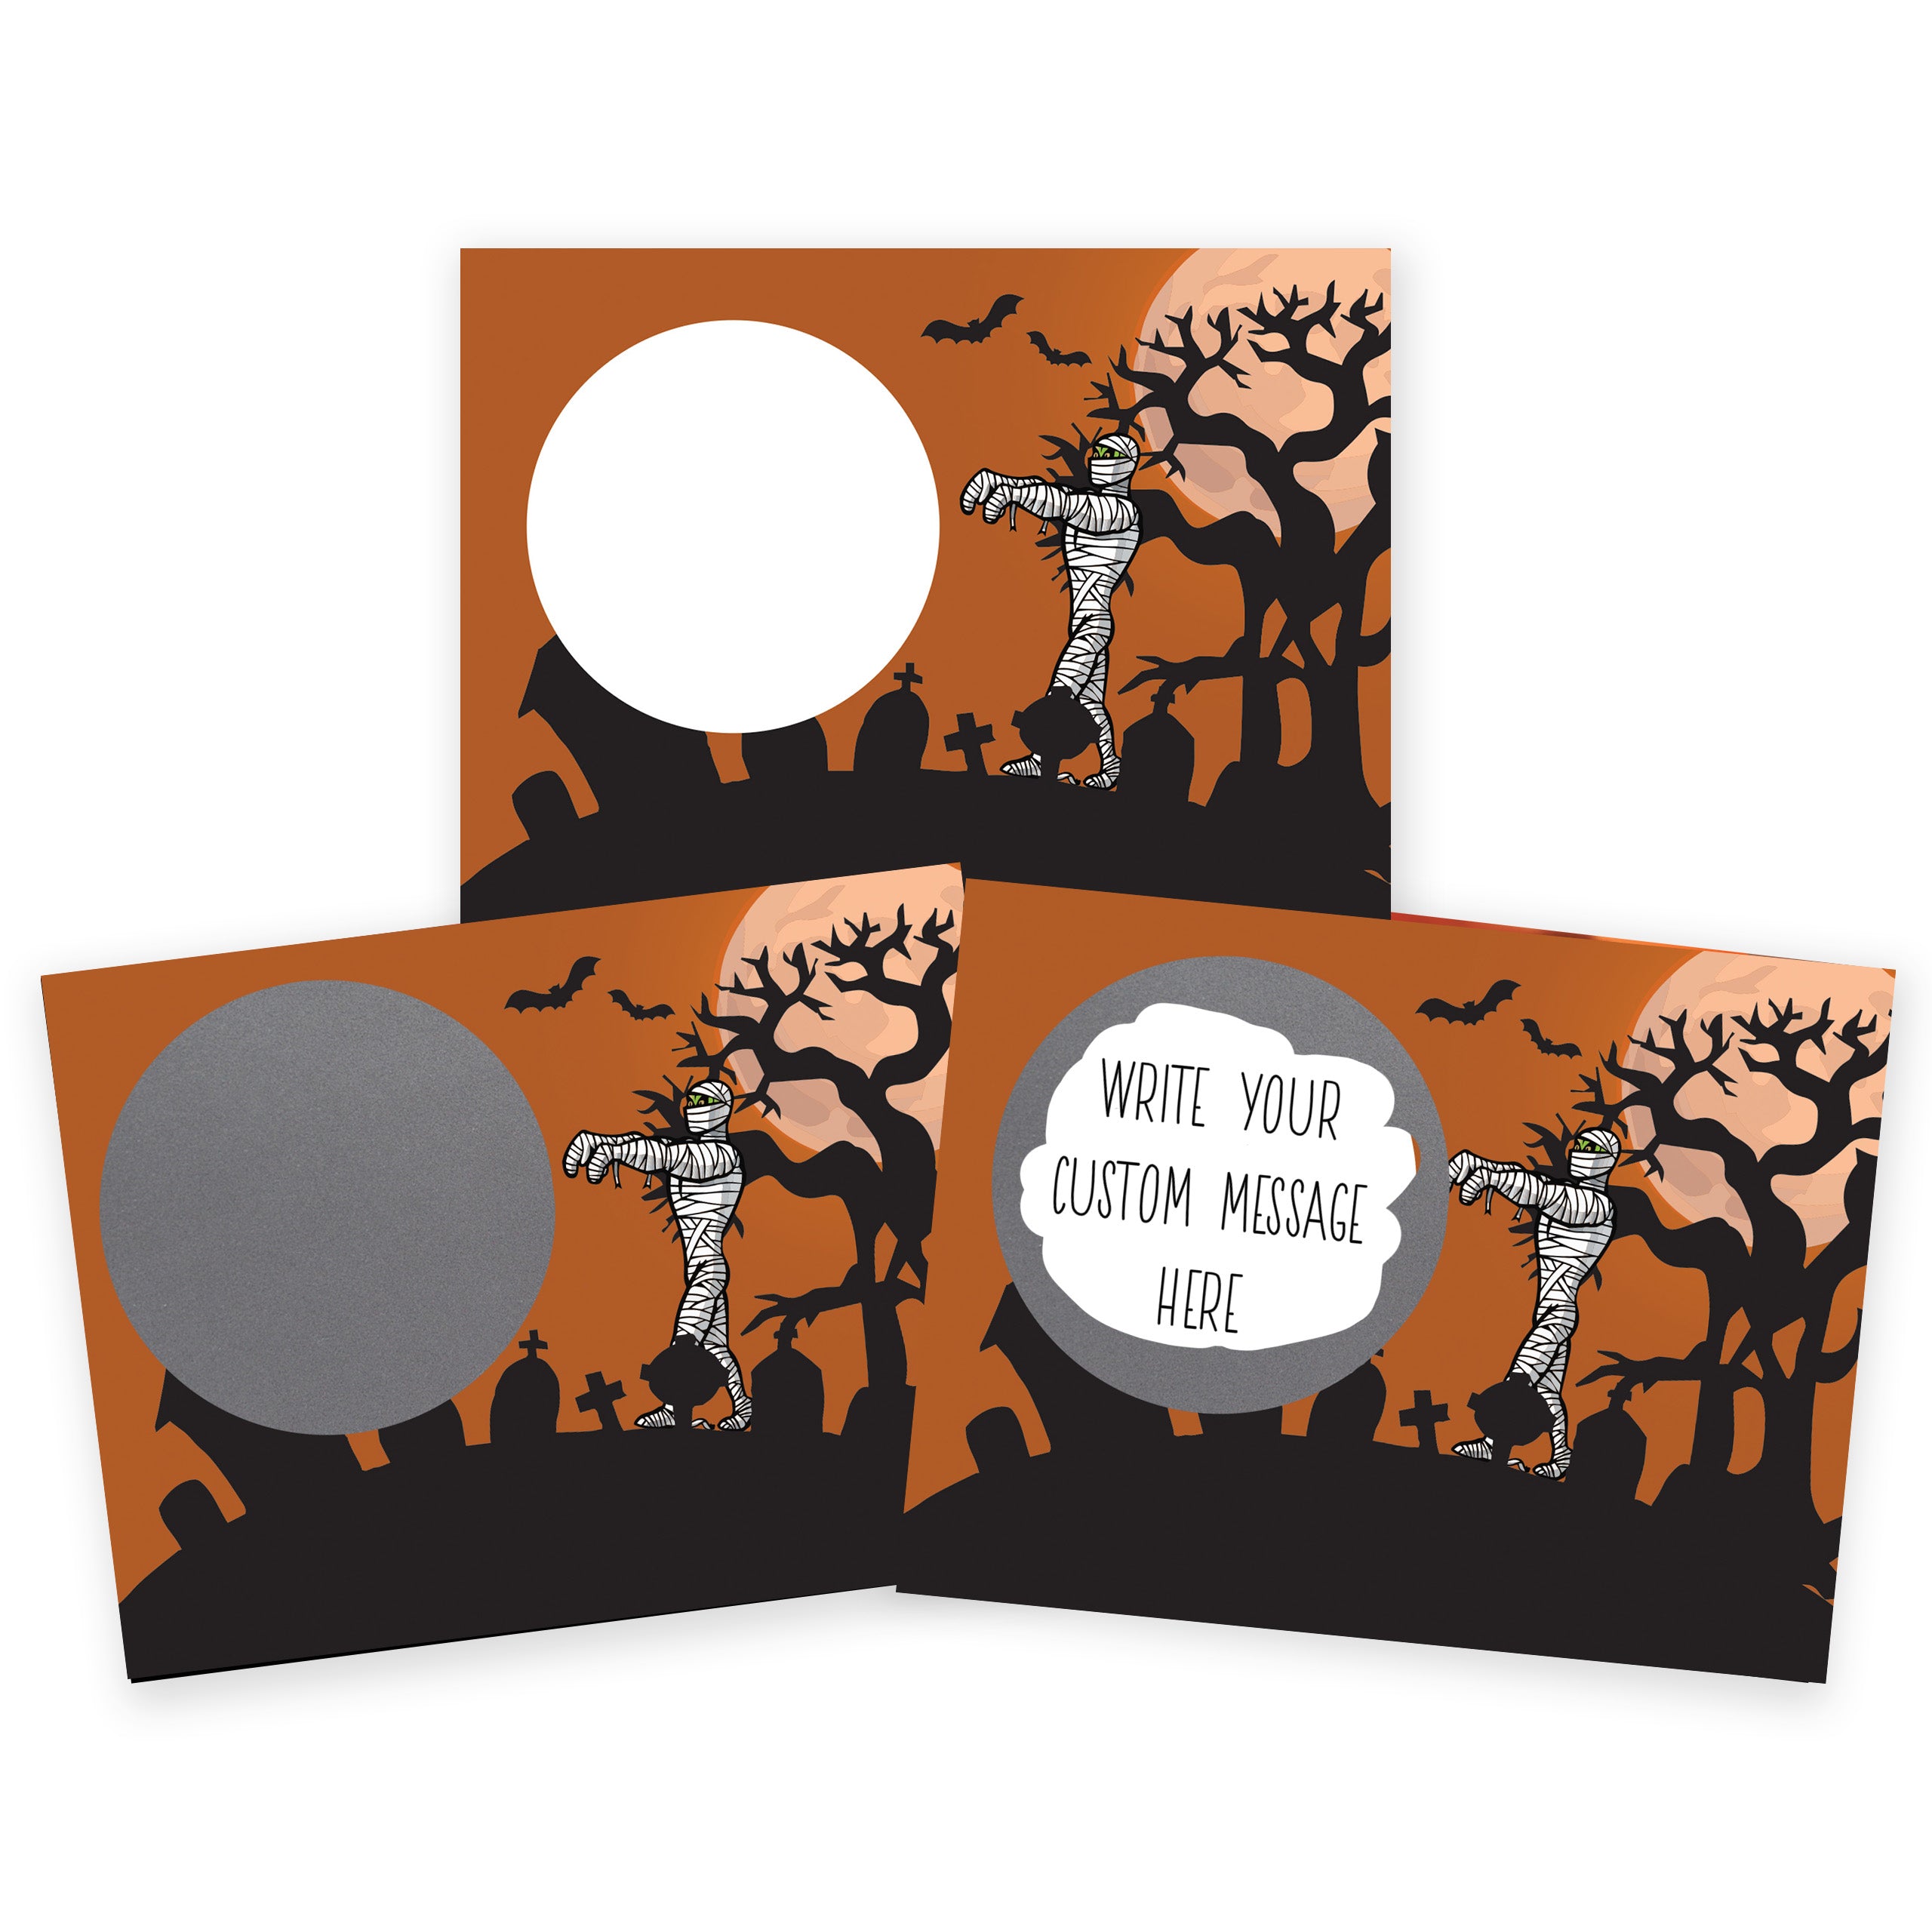 DIY Halloween Mummy Make Your Own Scratch Offs - 20 Cards and 20 Scratch Off Stickers